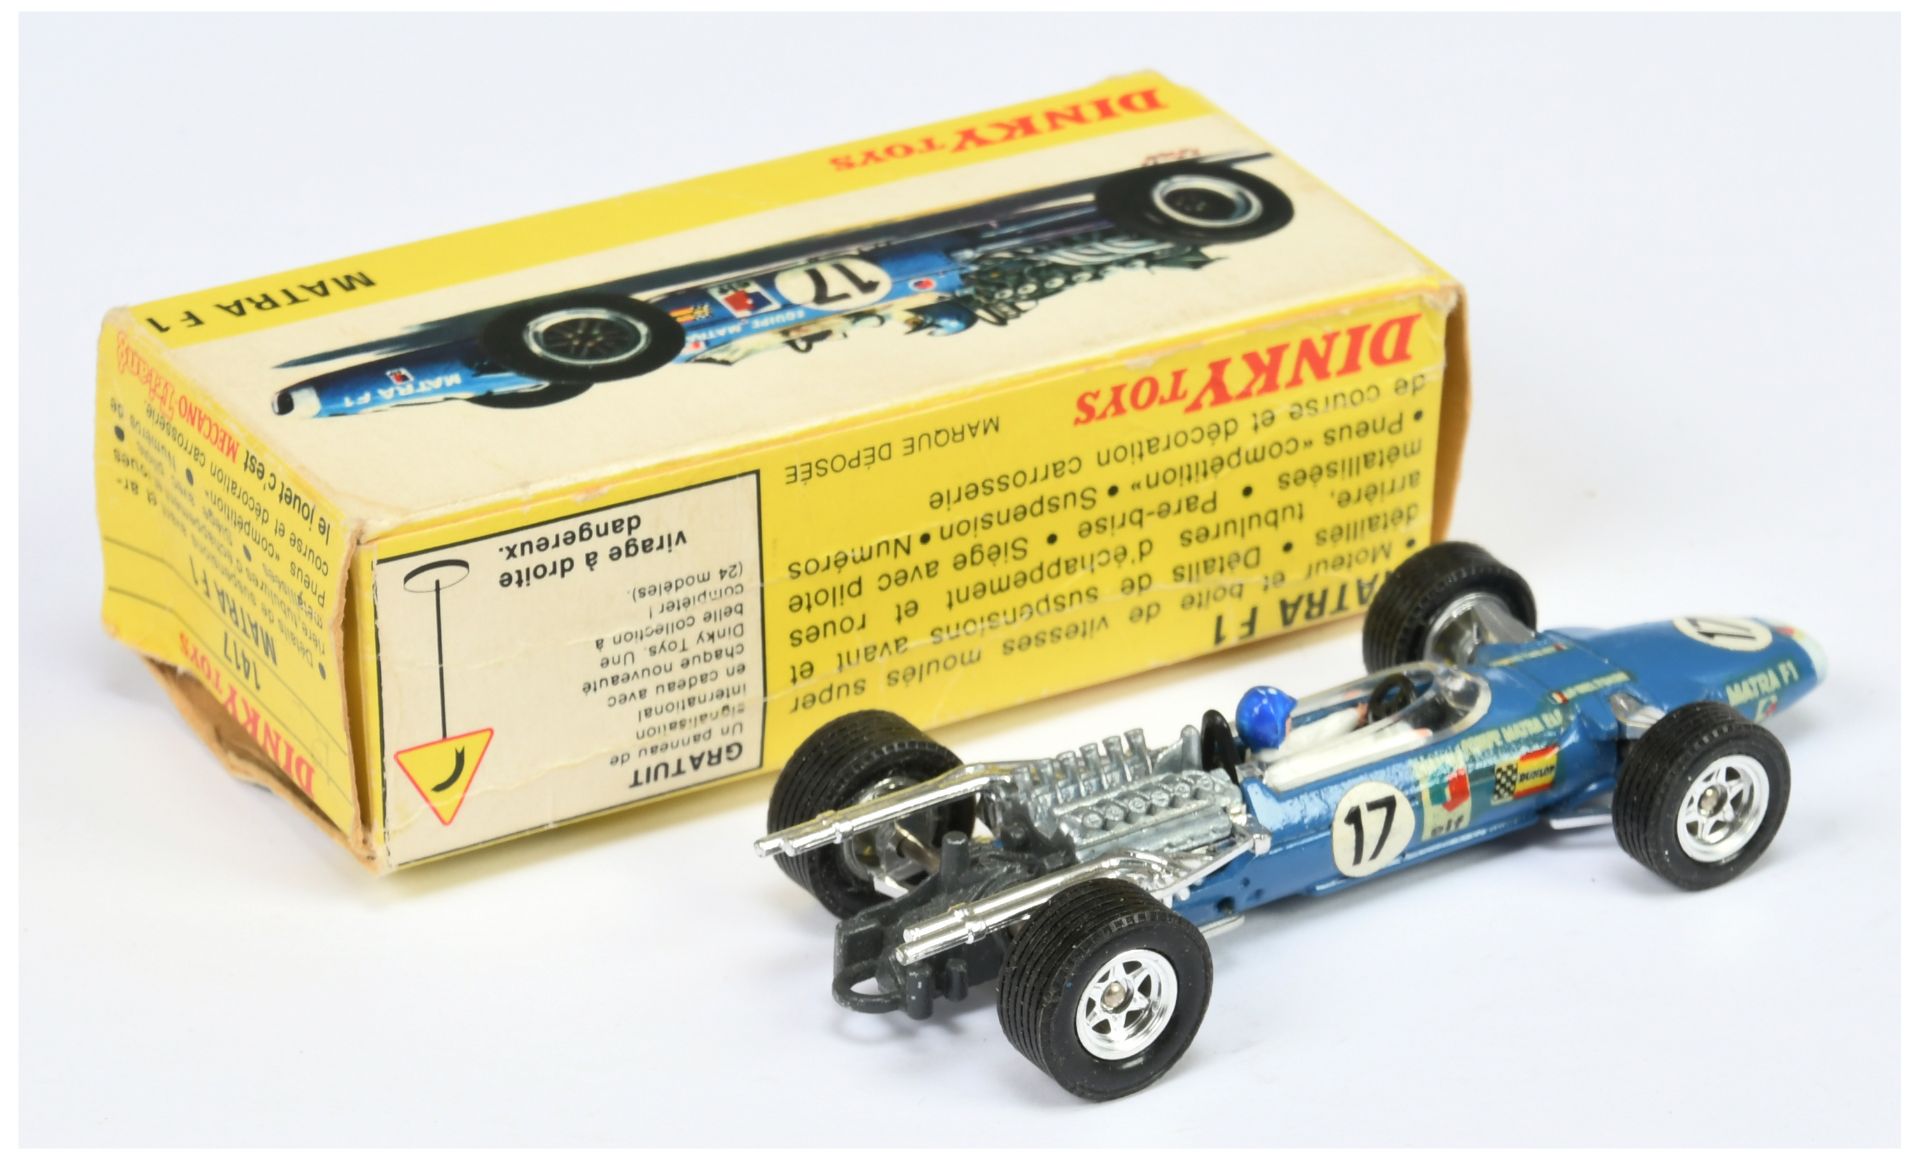 French Dinky Toys 1417 Matra F1 racing Car - Blue body, white front flash with decals applied - Image 2 of 2